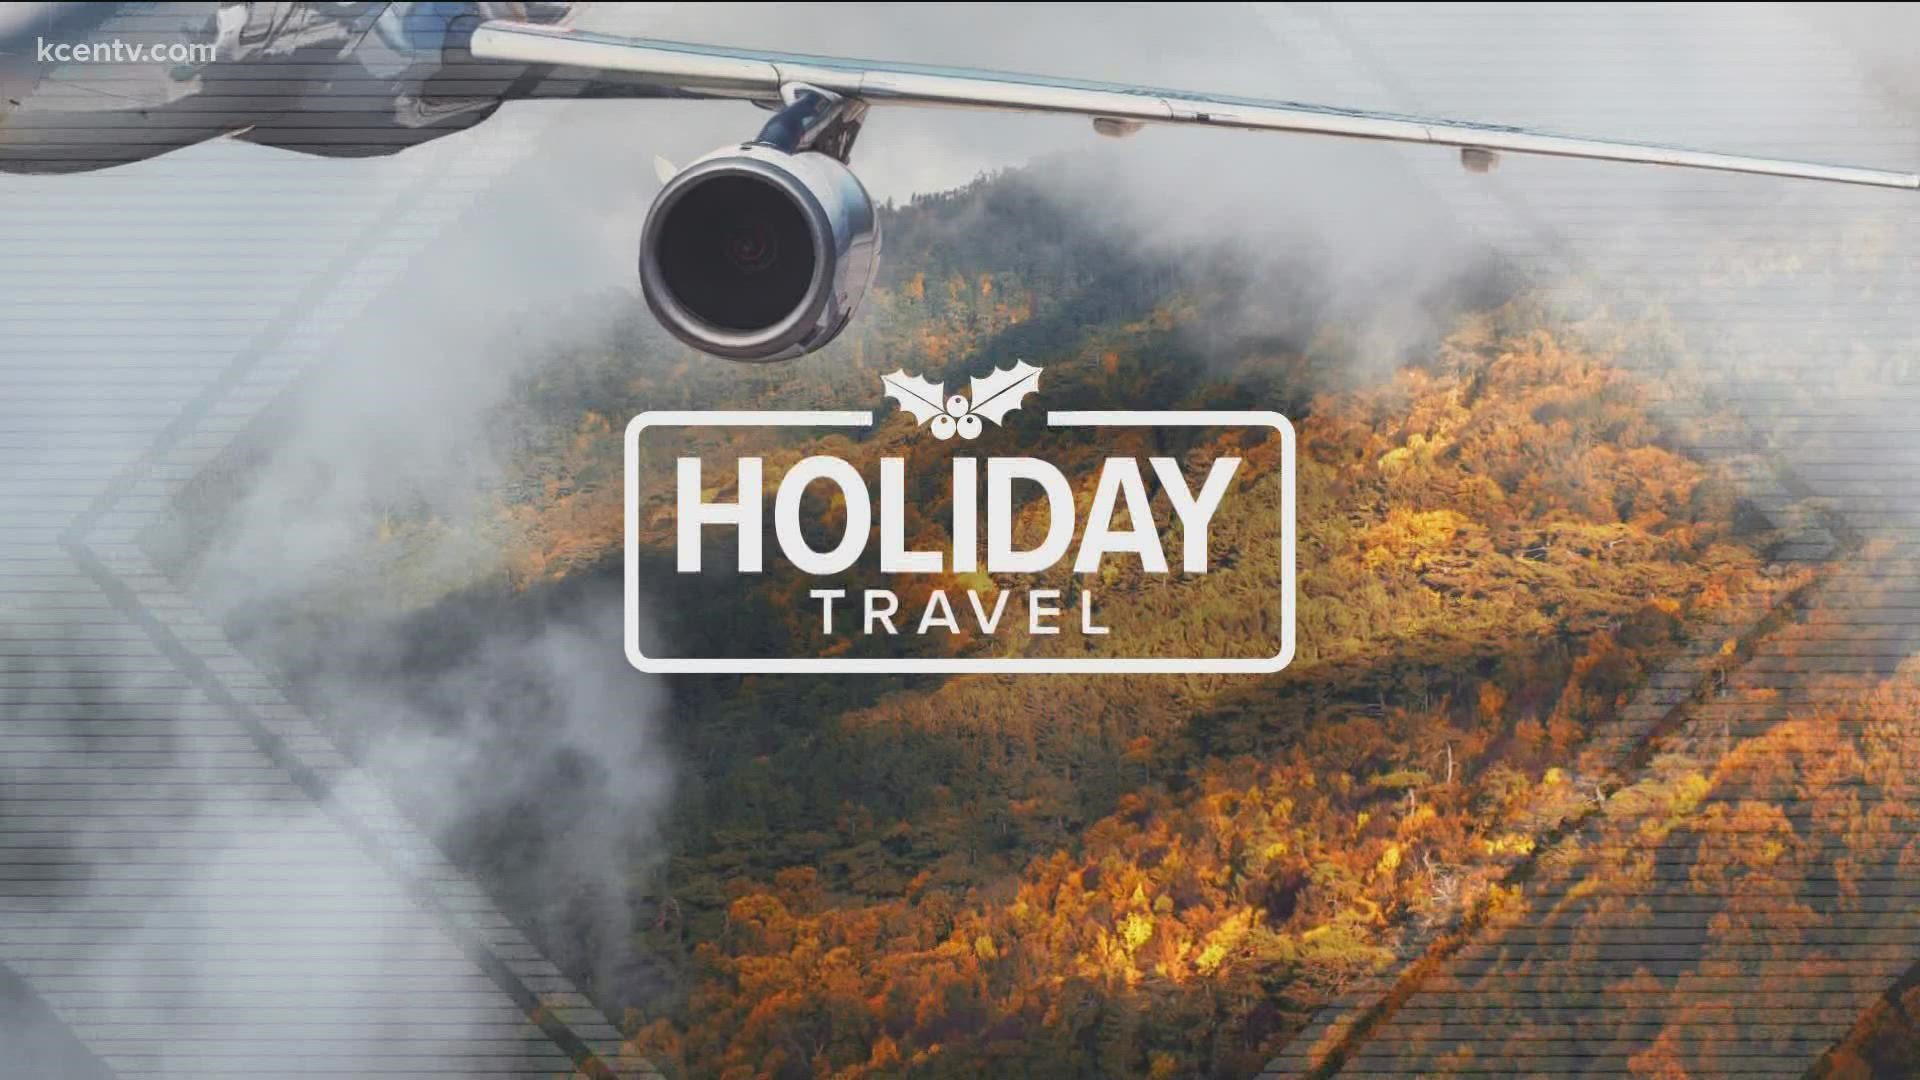 Texas Today's Bary Roy shares some thanksgiving travel tips to remember when traveling during the holidays.